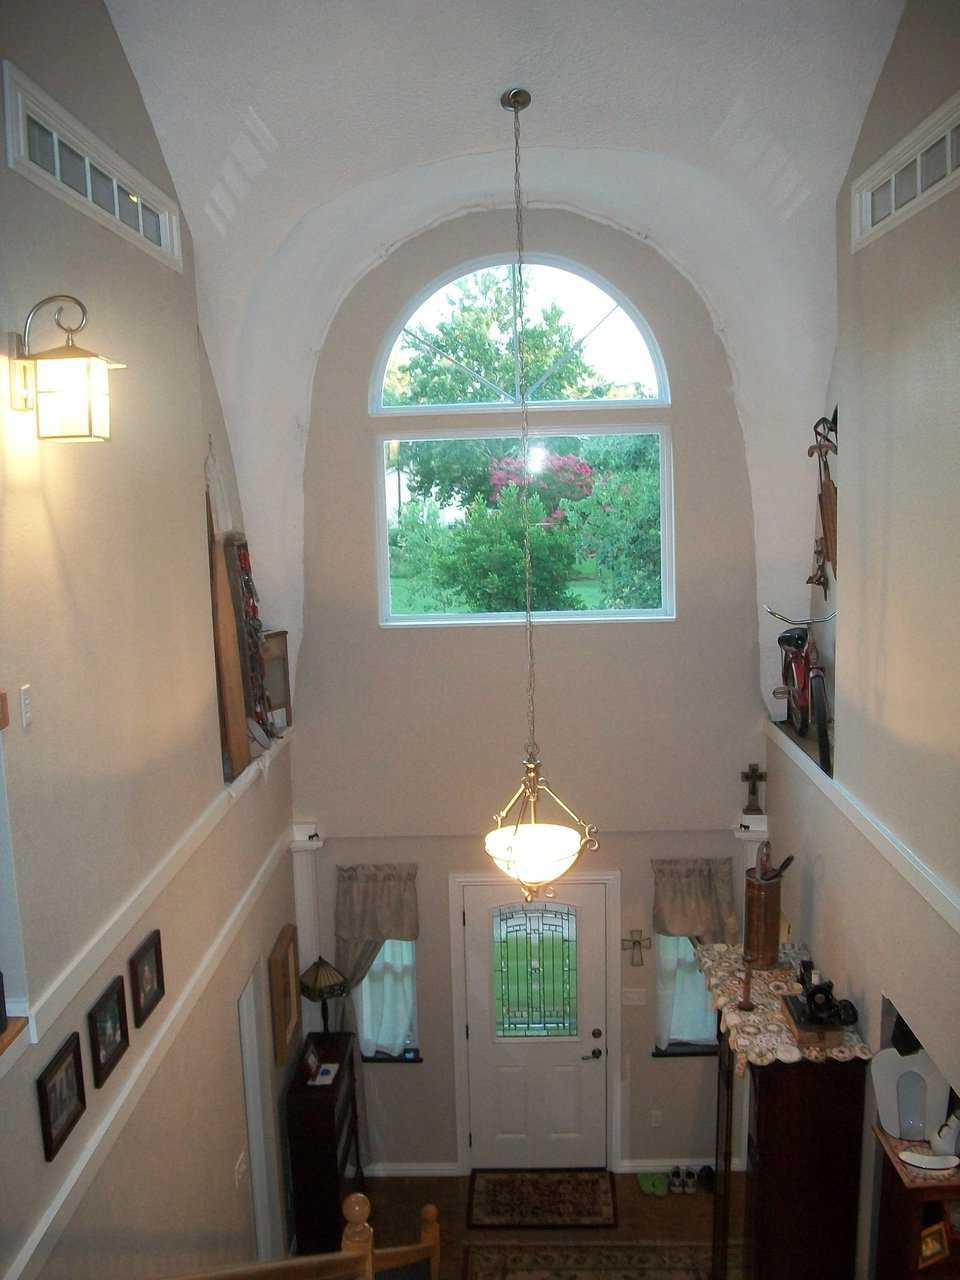 This gracious front entrance leads into a comfortable living area.